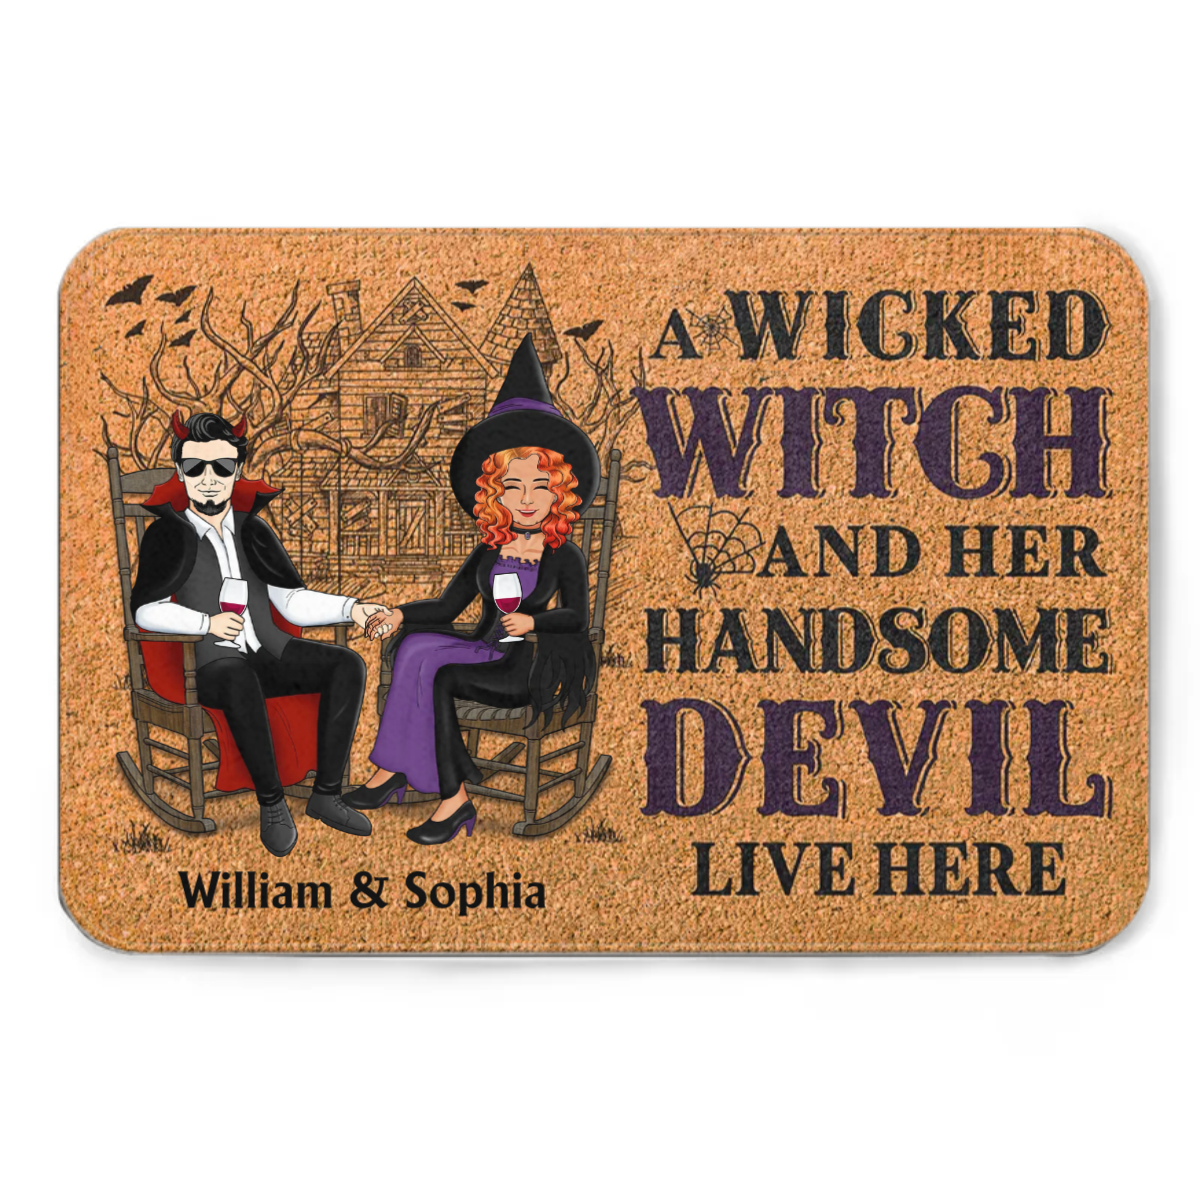 A Wicked Witch And Her Handsome Devil Live Here - カップルへのギフト - パーソナライズされたカスタムドアマット